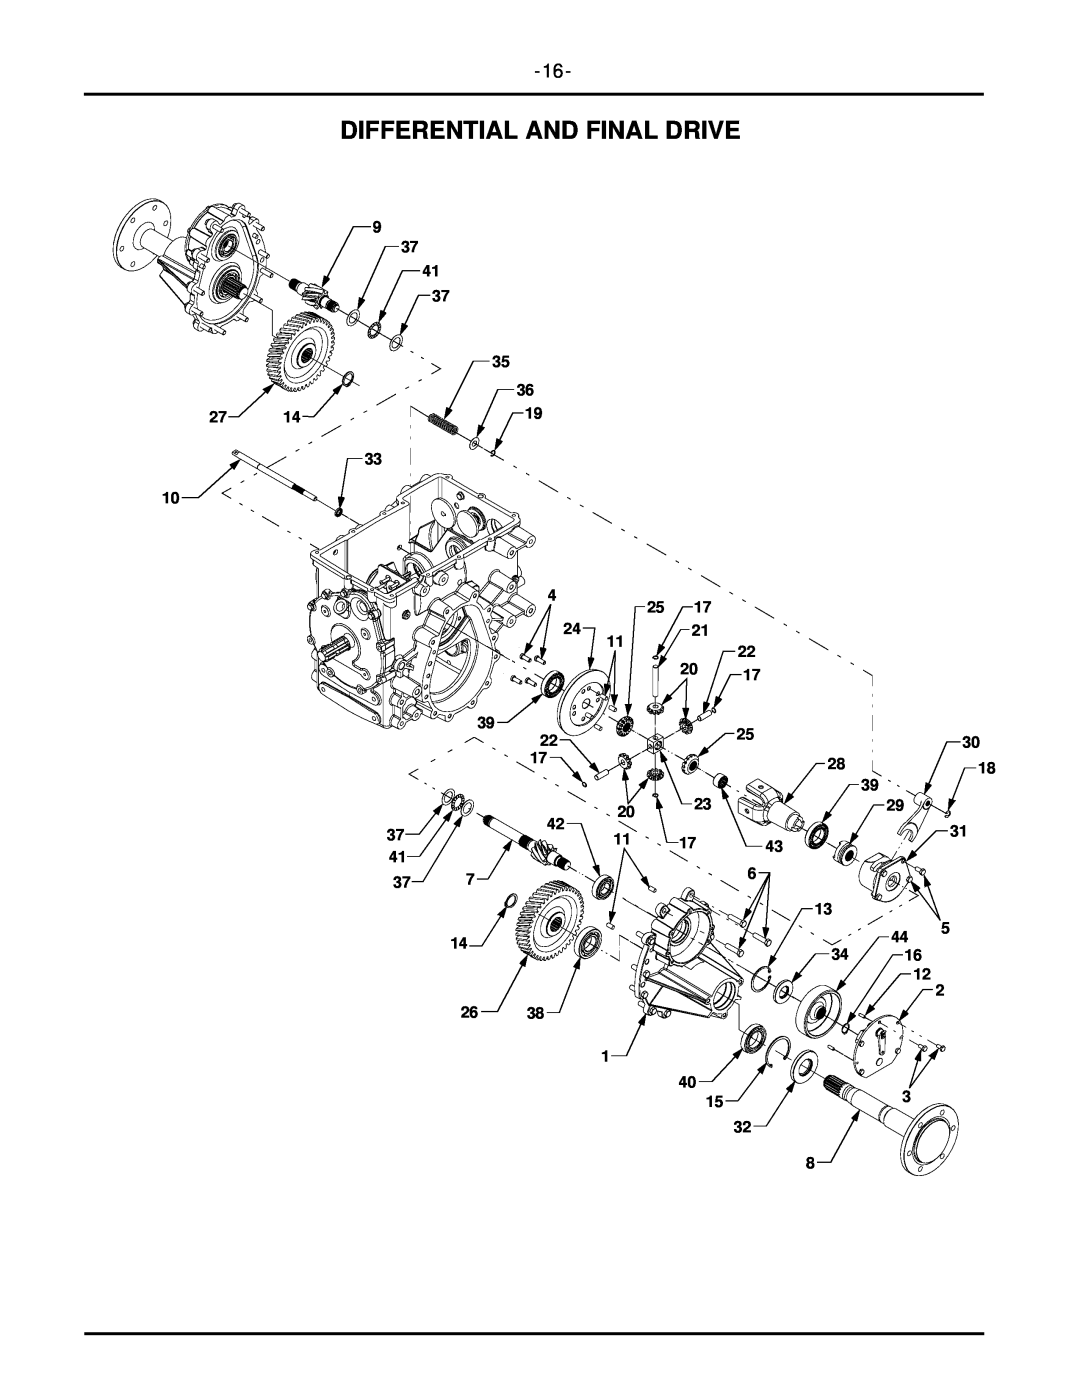 MTD 7252 manual Differential And Final Drive 